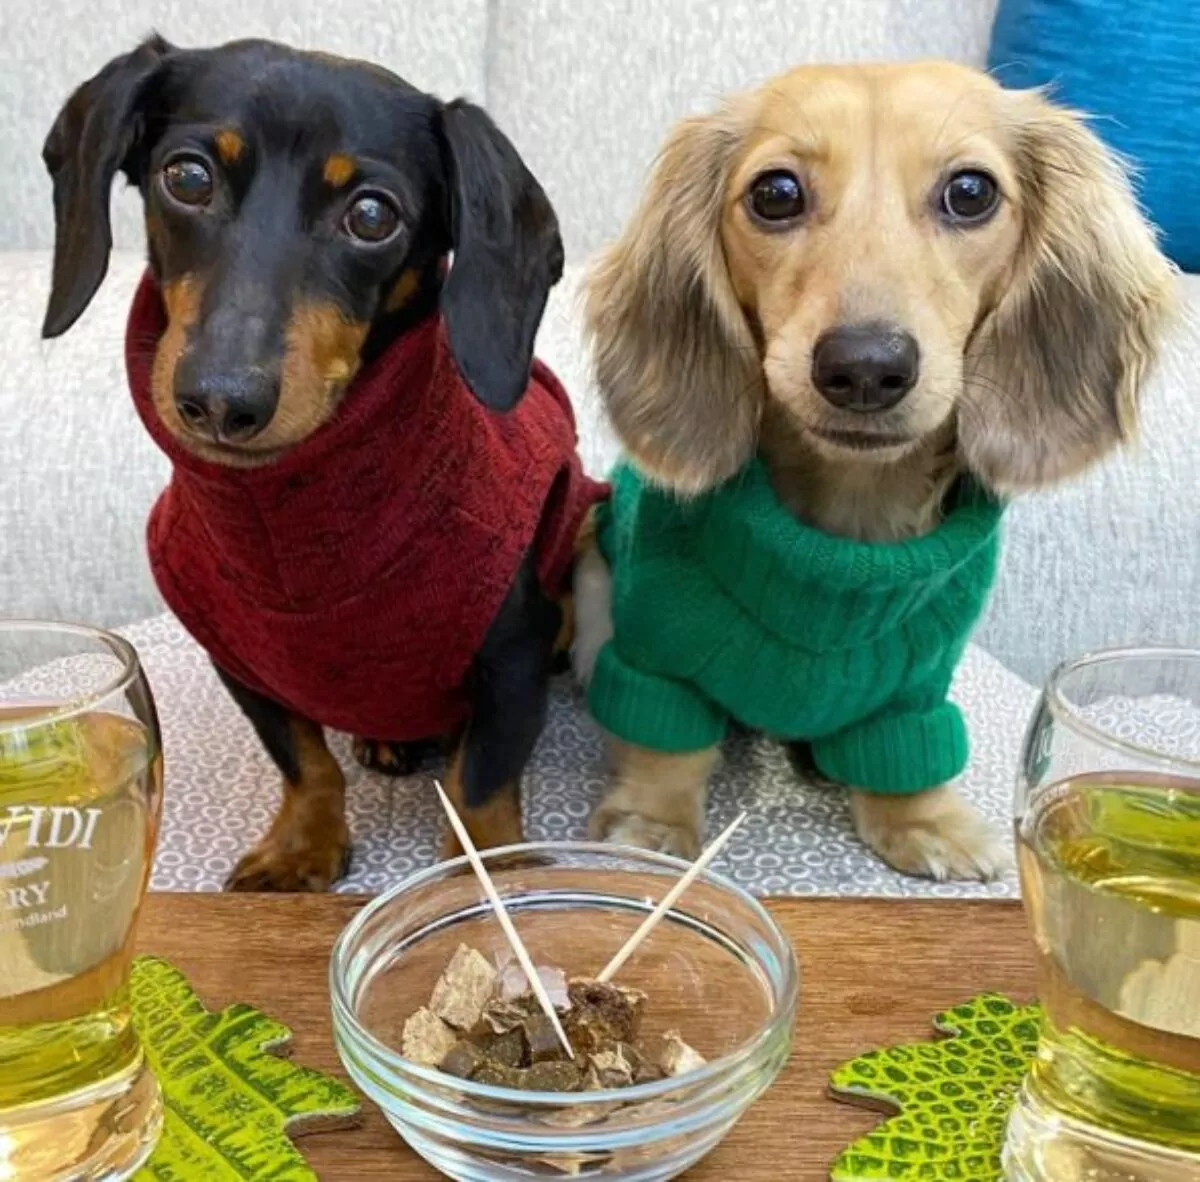 Two Dachshunds sat together in their doggy jumpers